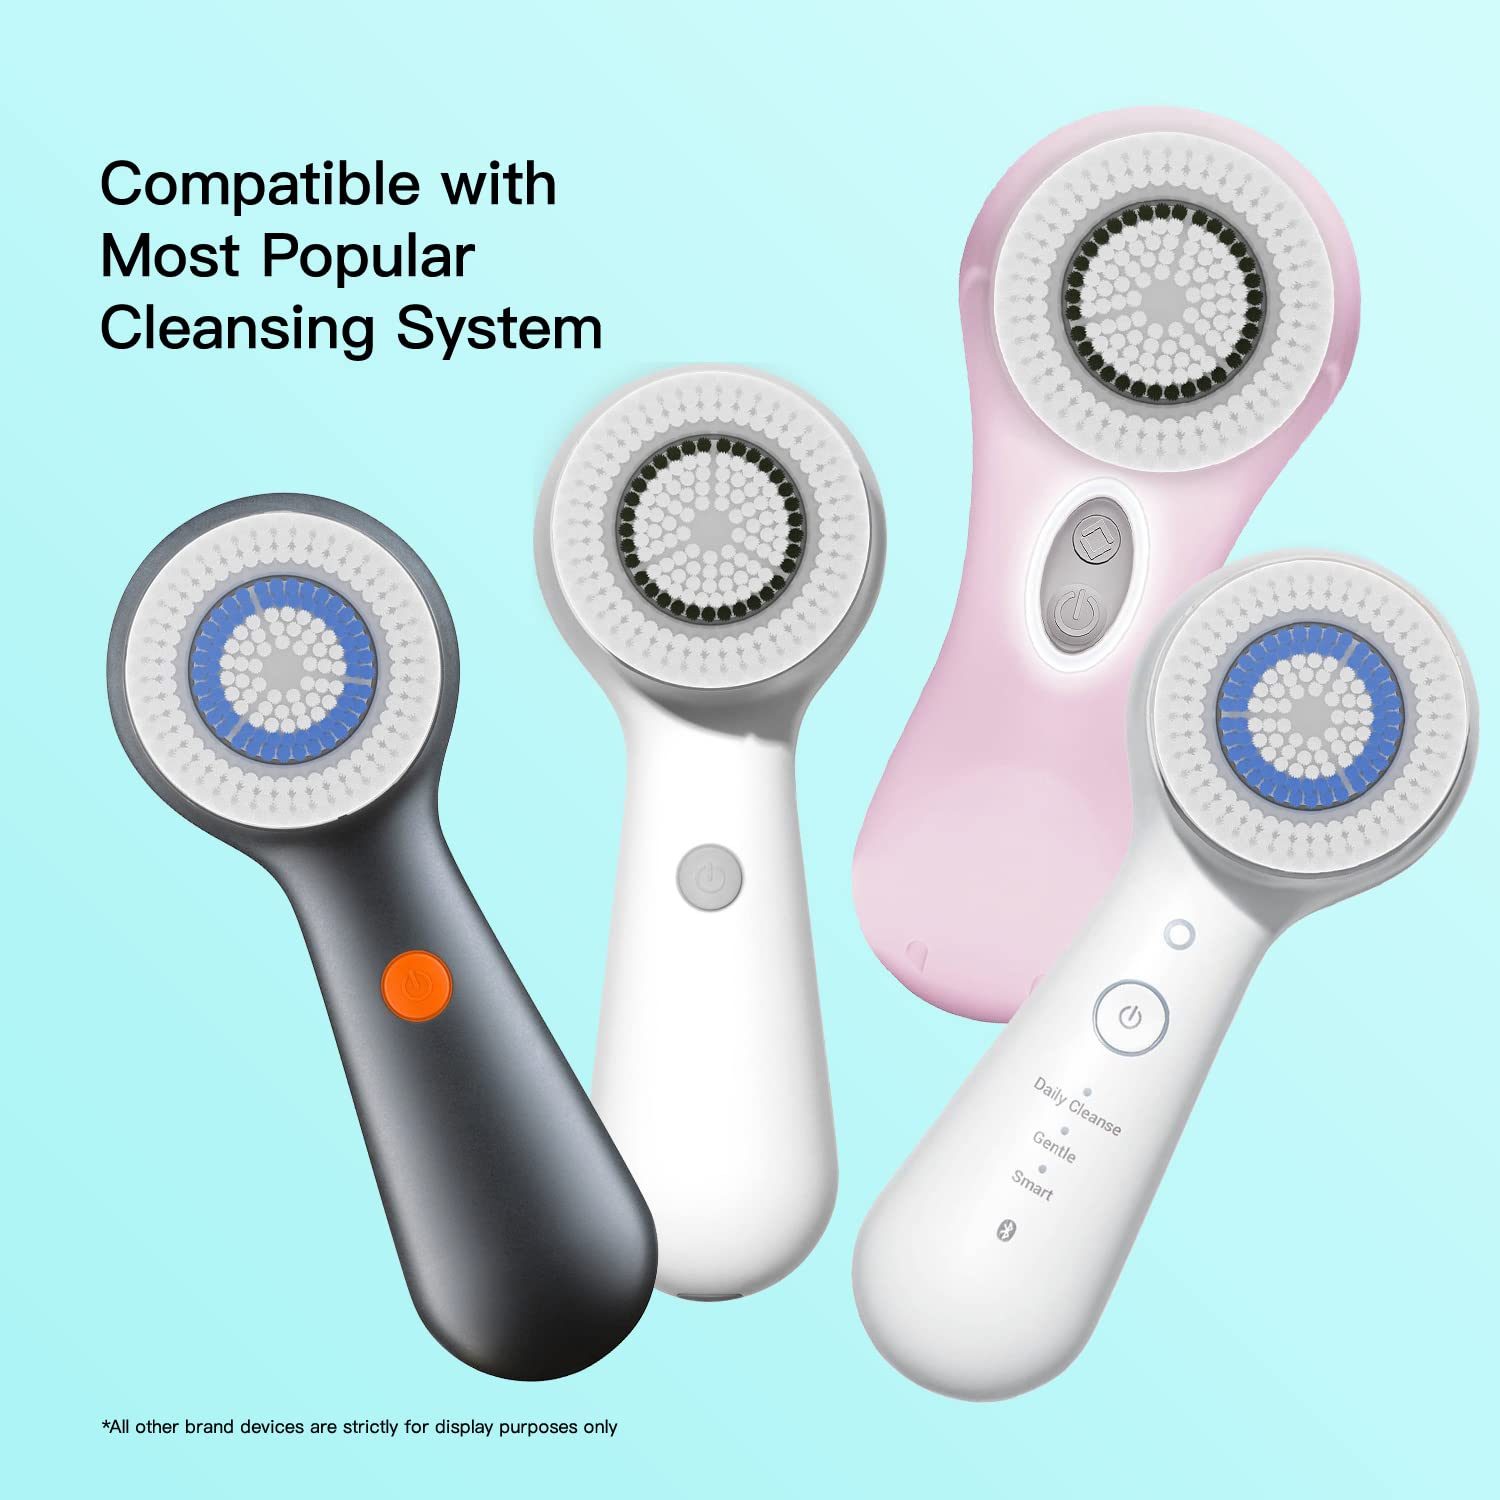 Replacement Facial Cleansing Brush Heads for Clarisonic, 2 x Sensitive and 2 x Deep Pore, 4-pack